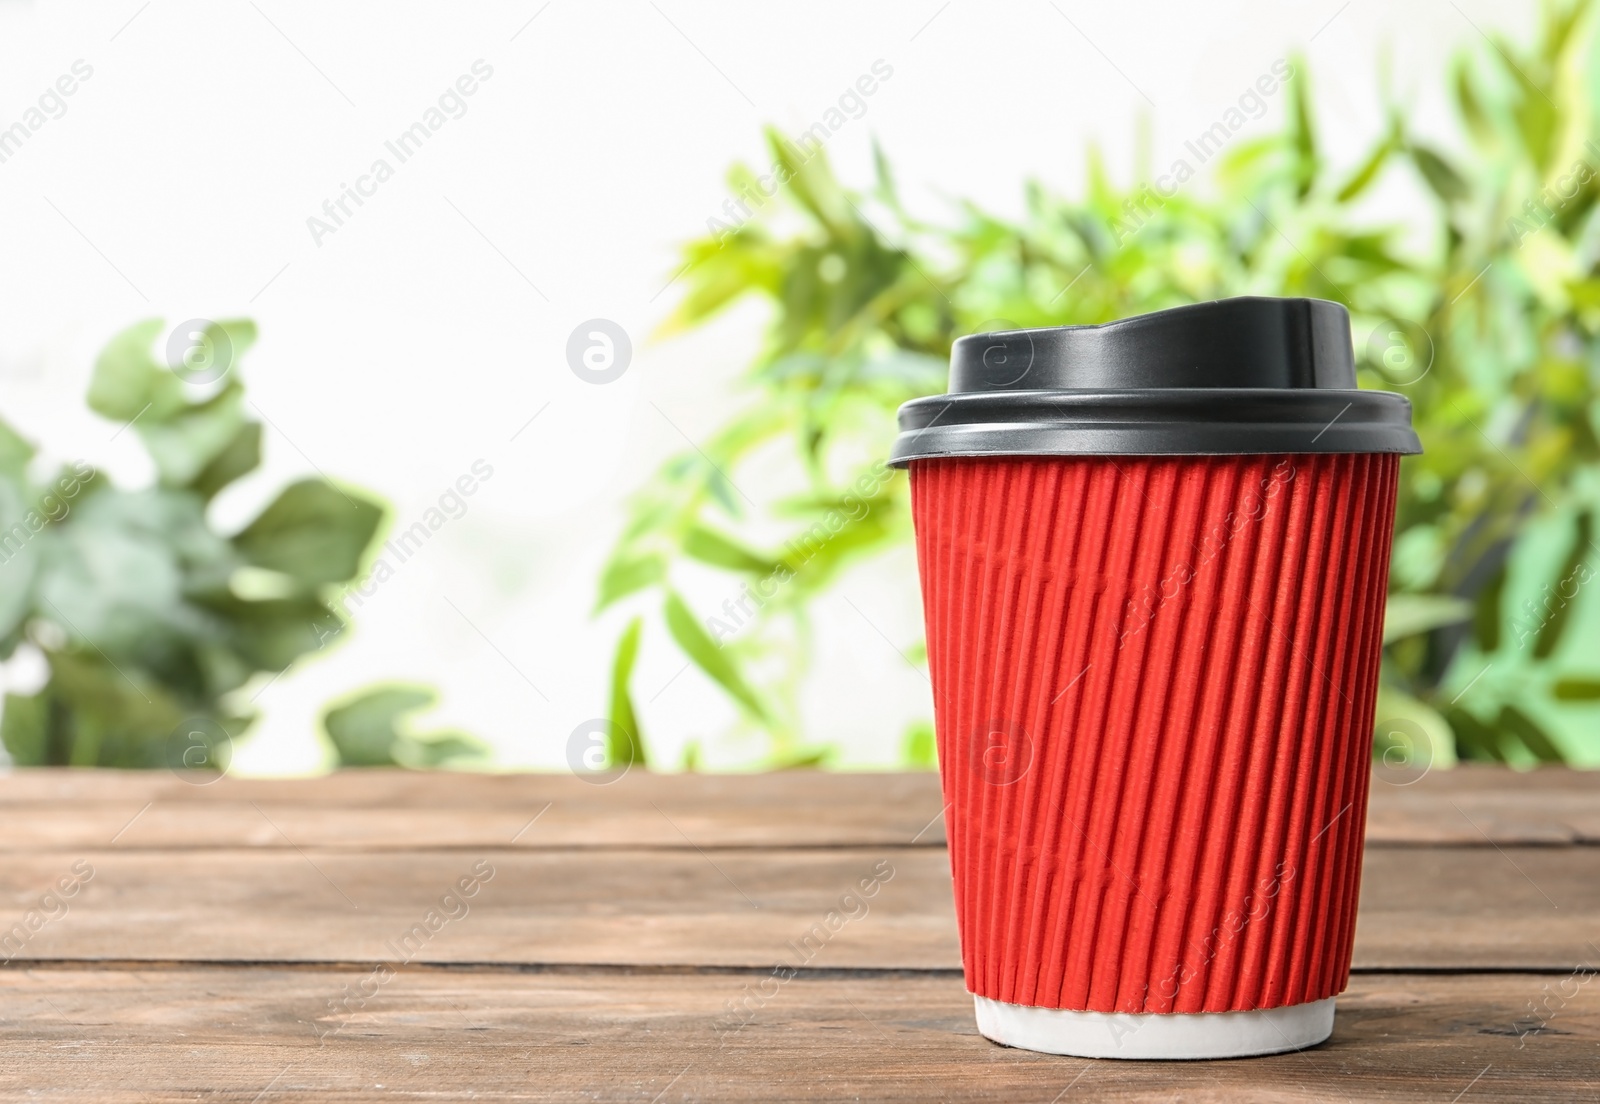 Photo of Cardboard coffee cup with lid on wooden table. Space for text